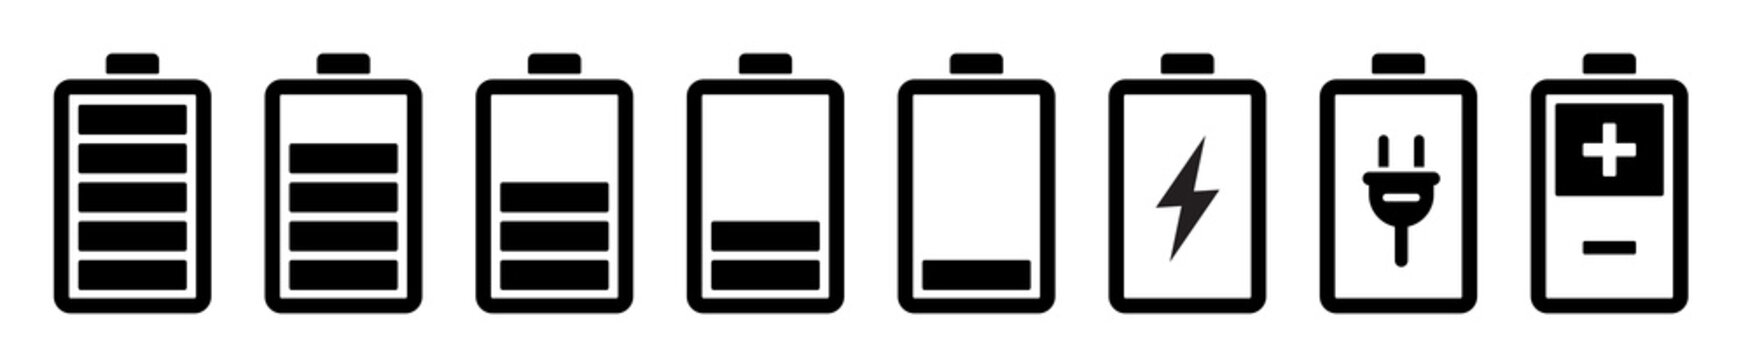 Battery icons set. Battery charging charge indicator icon. level battery energy. Alkaline battery capacity charge icon. Flat style - stock vector.